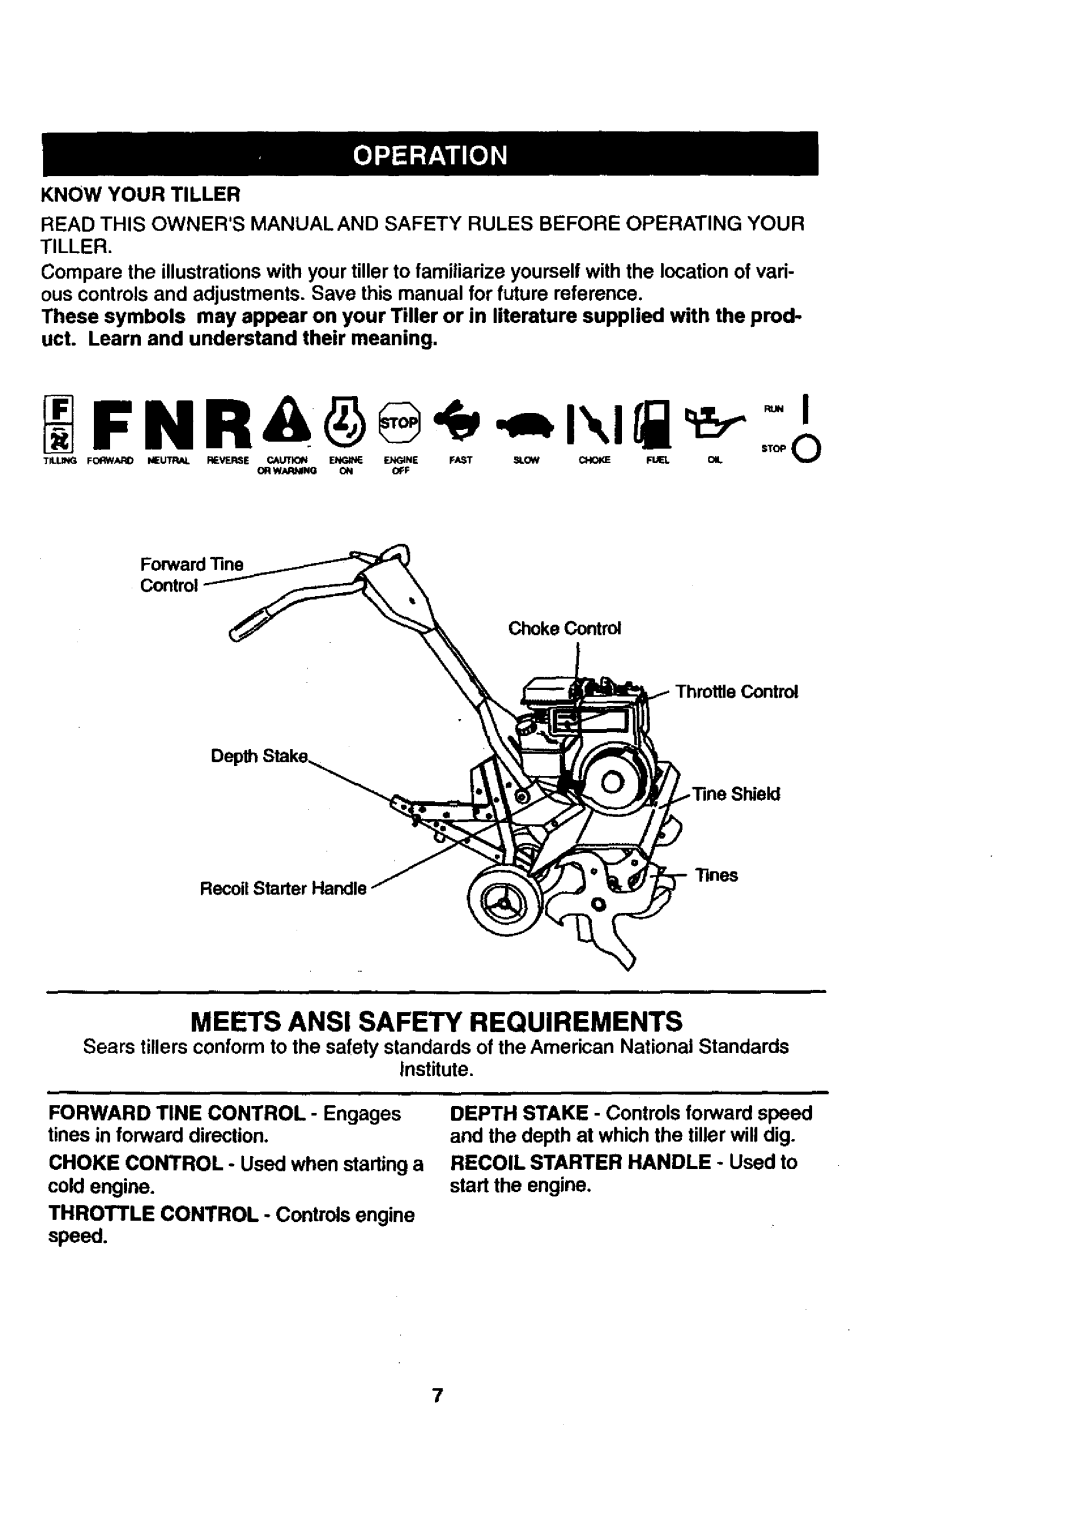 Craftsman 917.29239 owner manual Meets Ansi Safety Requirements, F N Ra, = I\l, olo, cold engine 